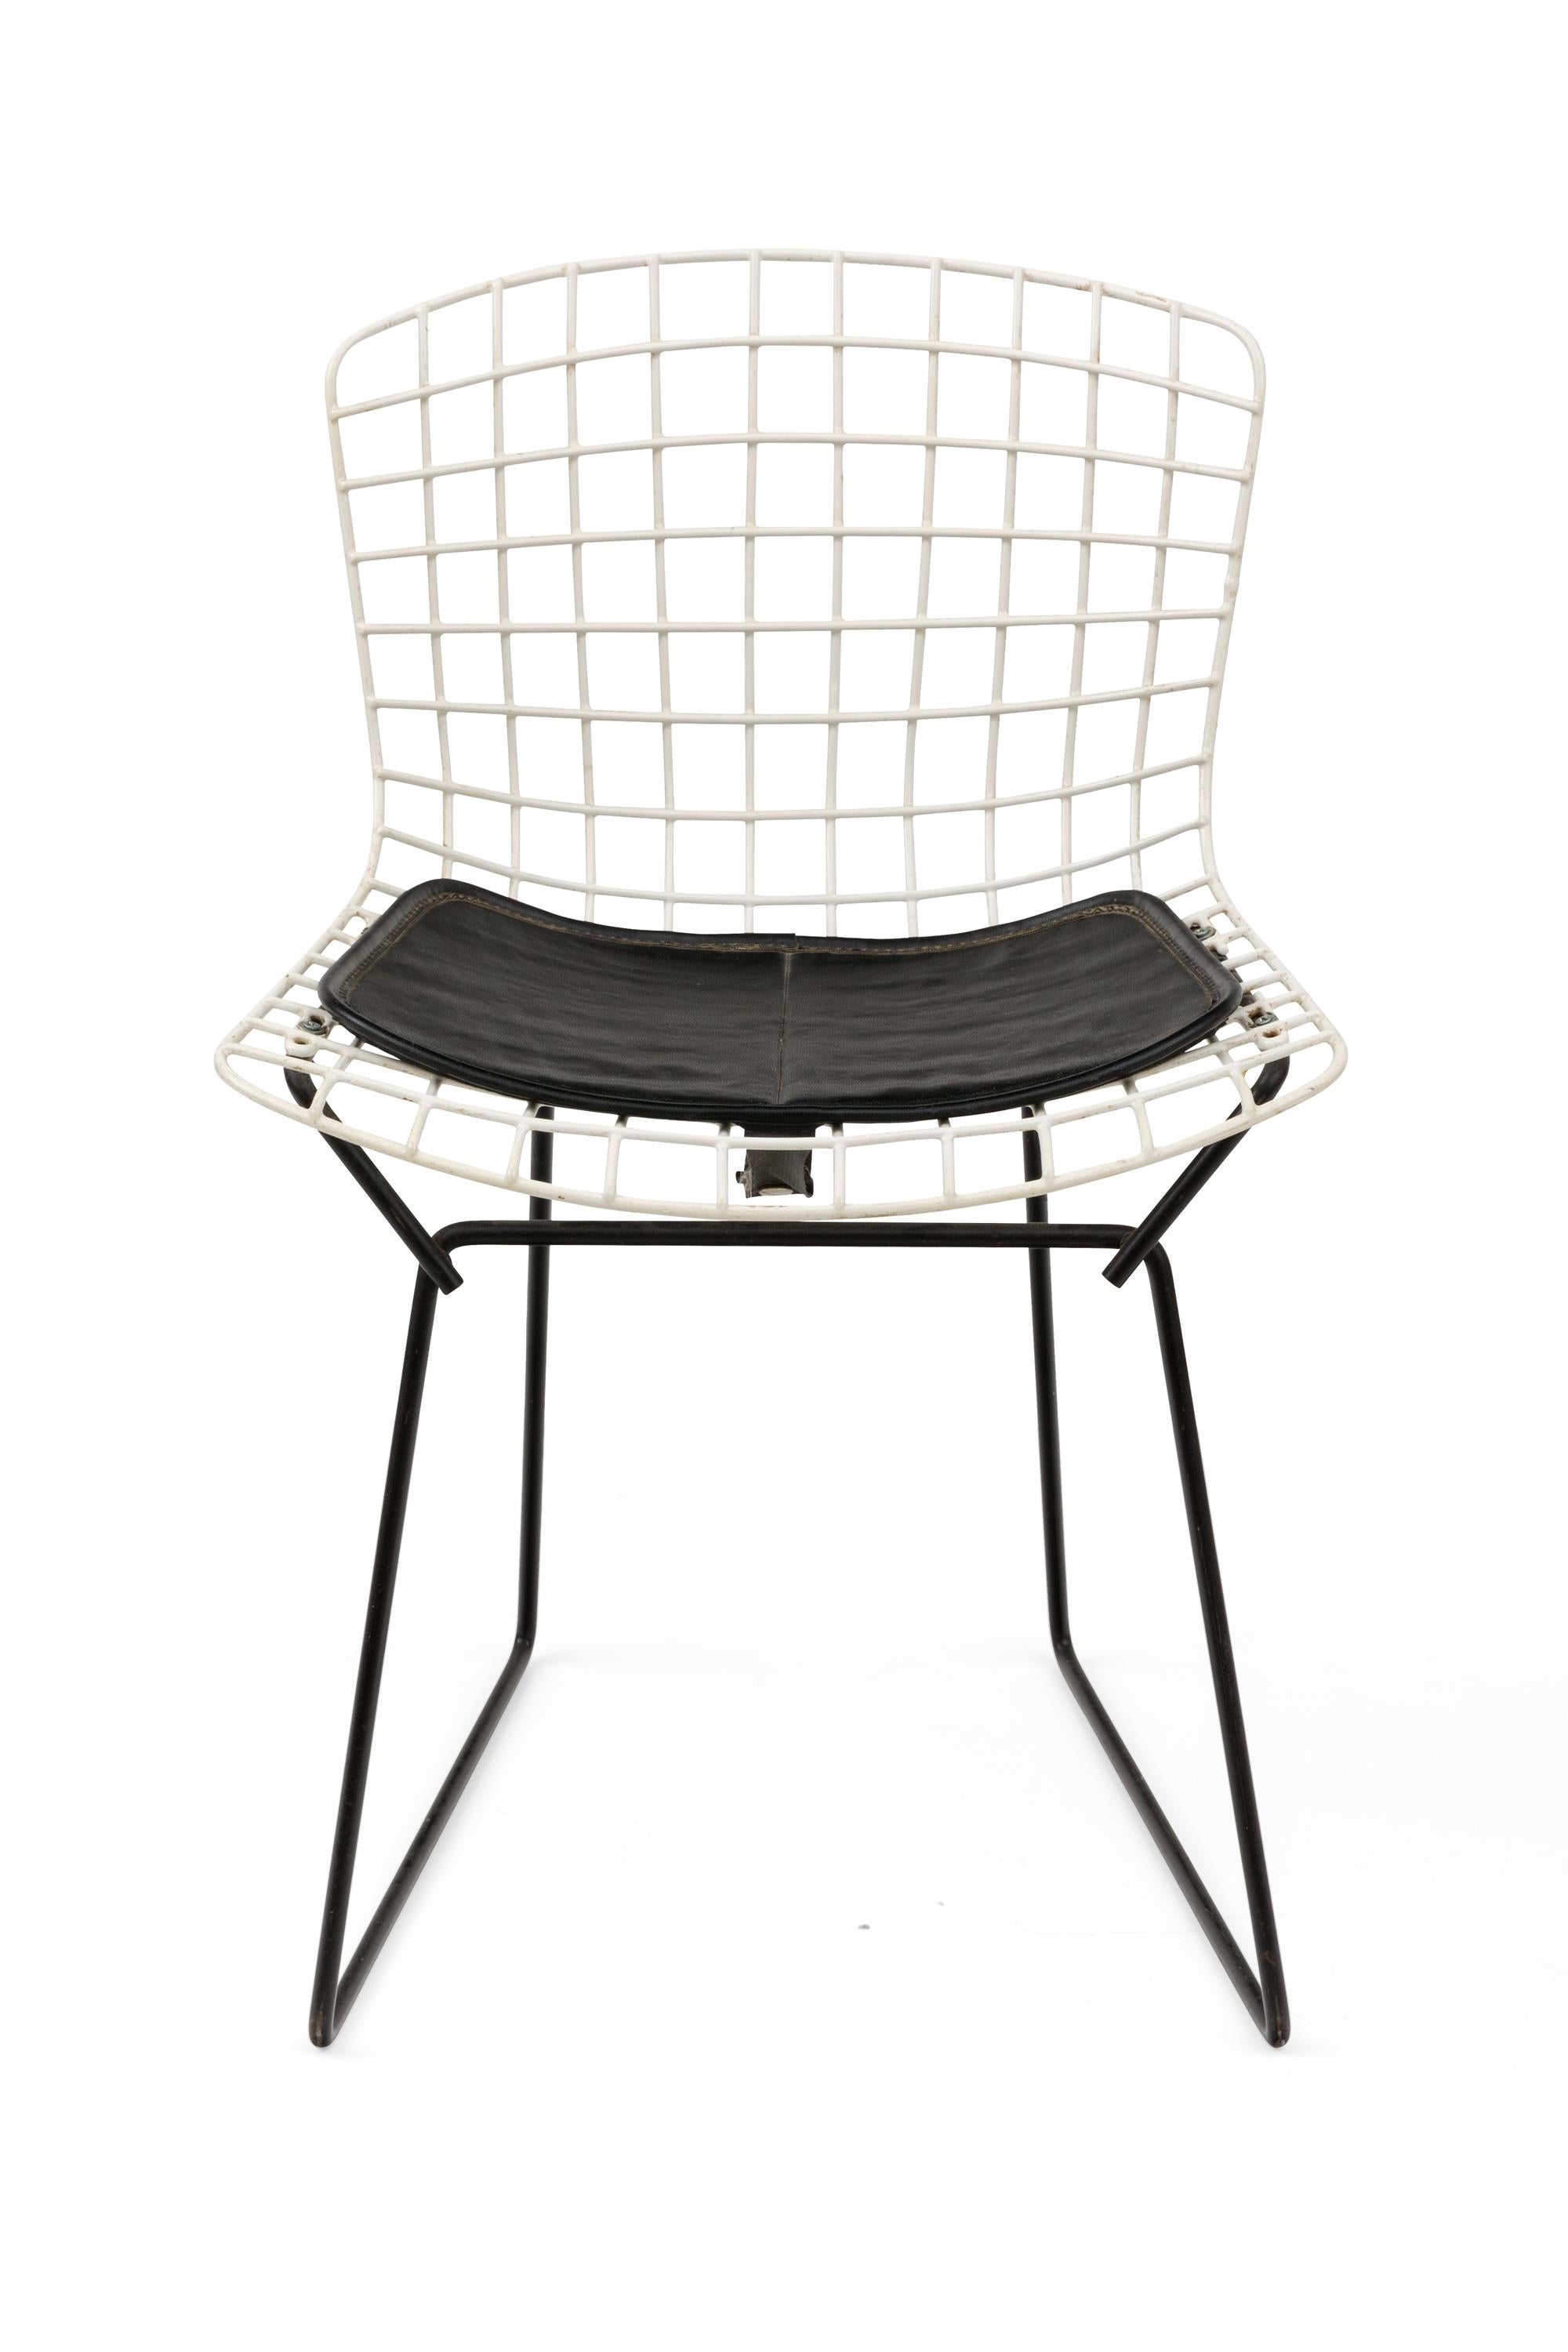 A universally recognized design, these Bertoia child's chairs have black bases and the original seat pads.